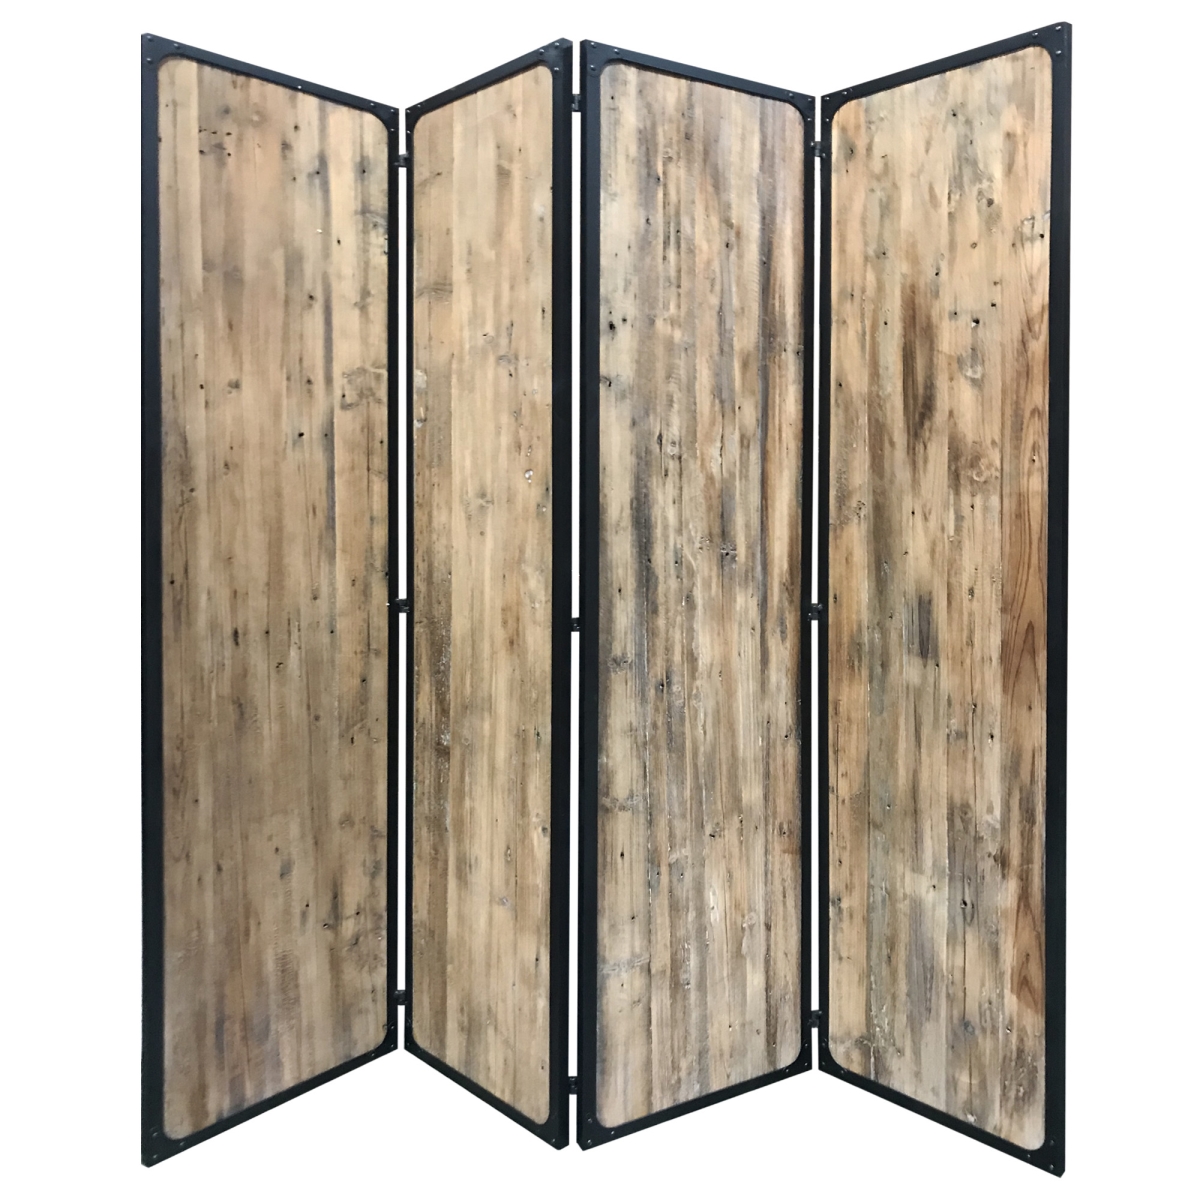 379906 4 Panel Room Divider, Brown - 84 X 80 X 1 In.